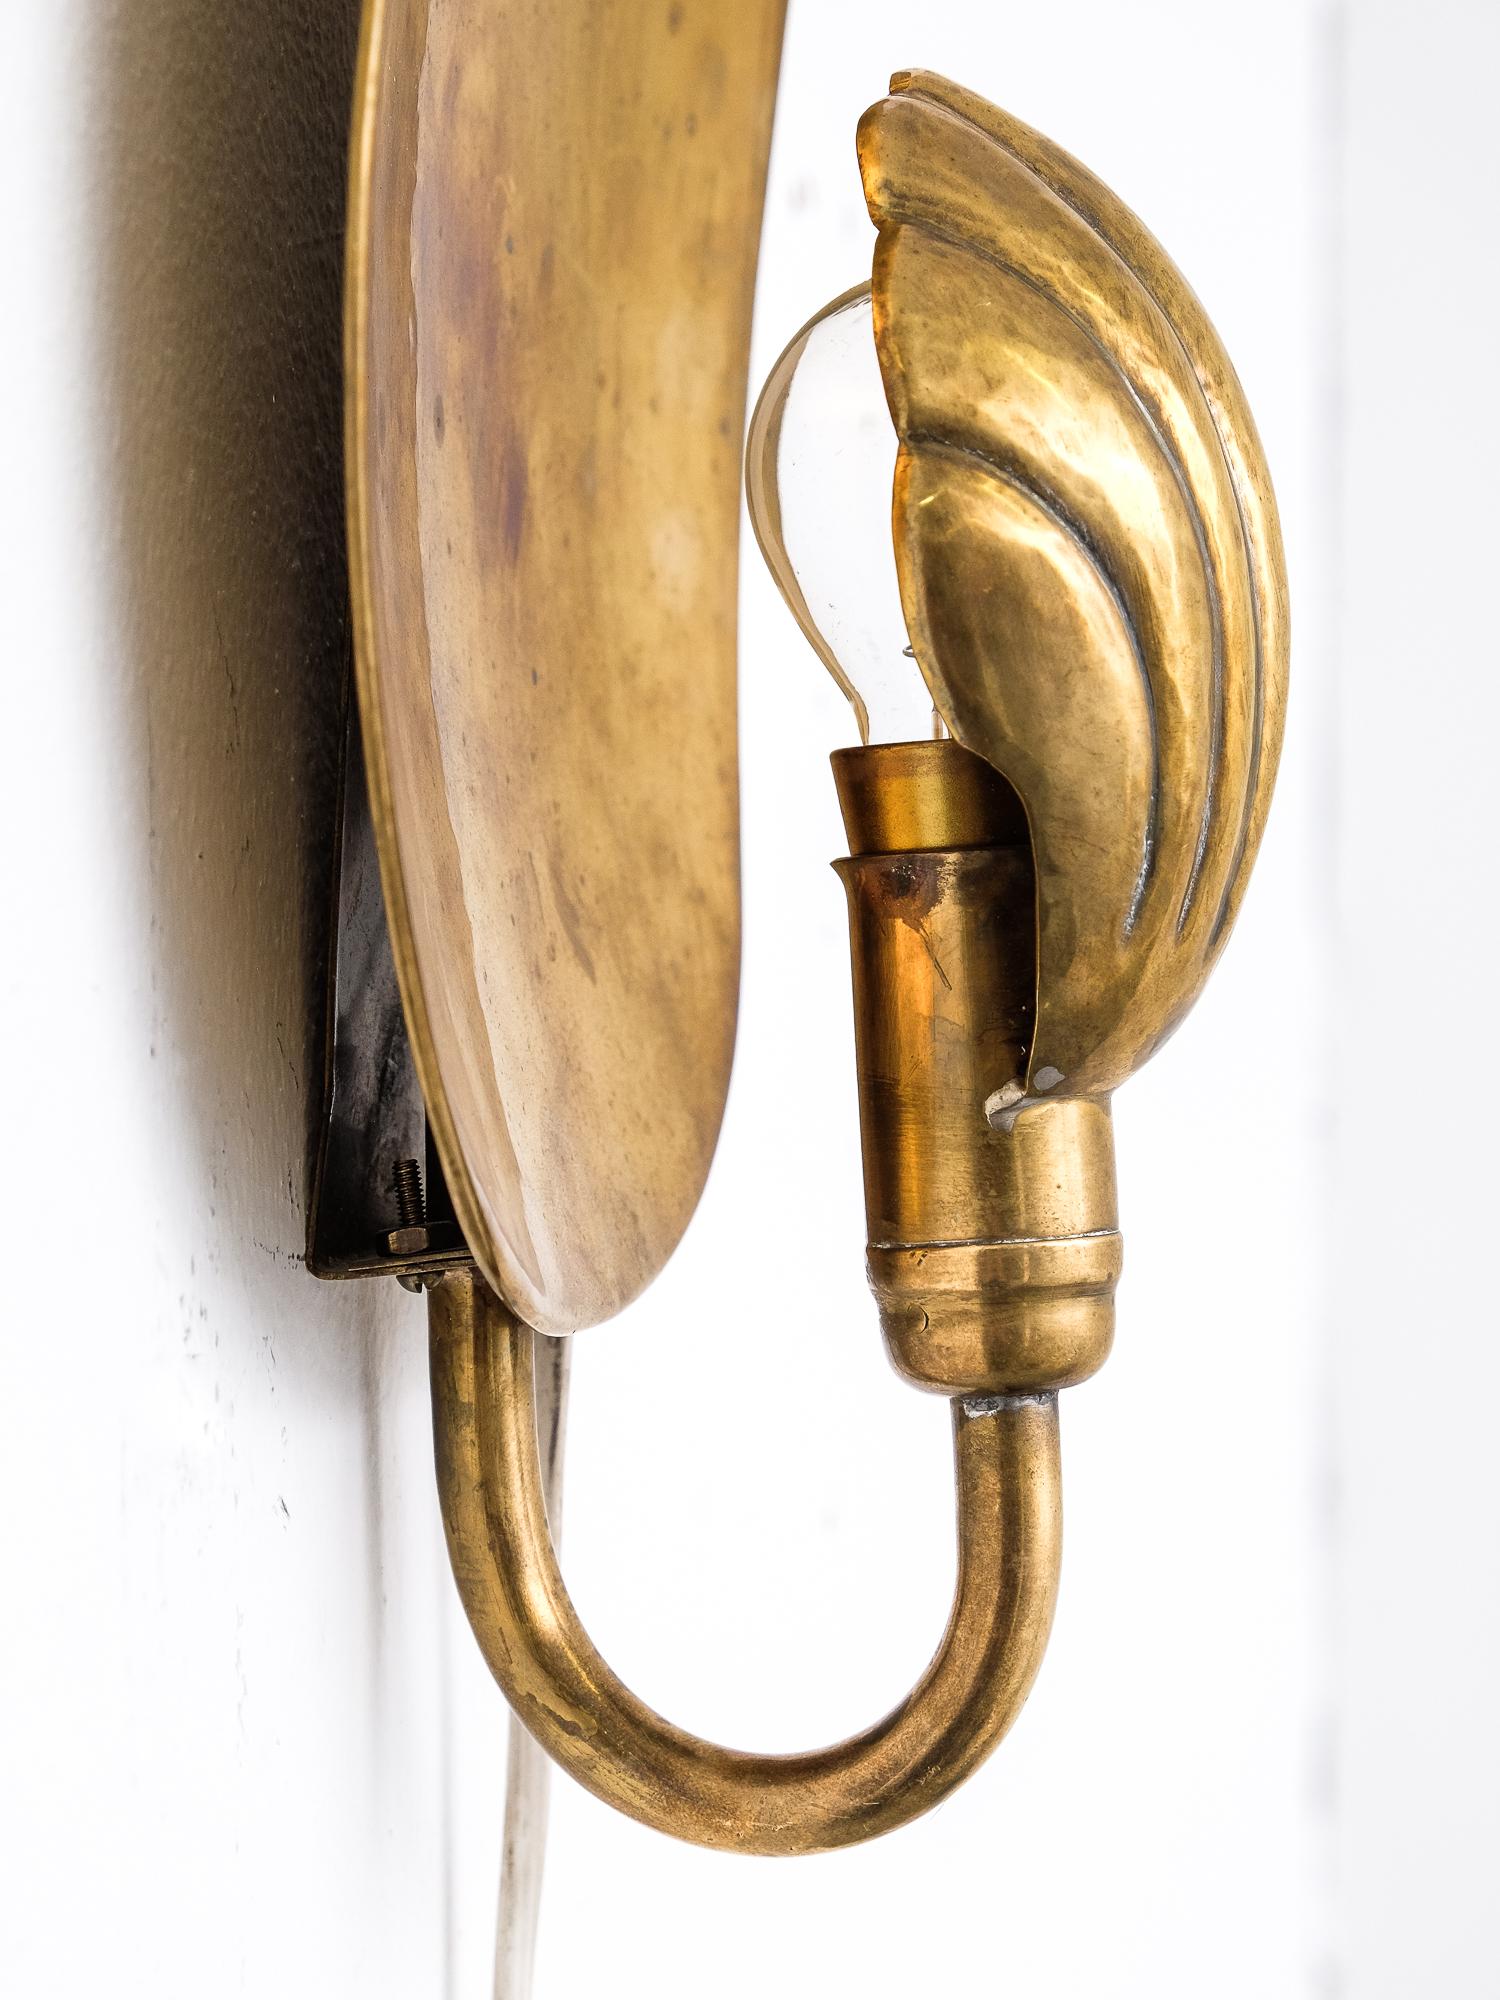 Elegant midcentury solid brass wall sconce designed by Lars Holmström and manufactured by Swedish company Arvika.

E14 light bulb. Stamped.